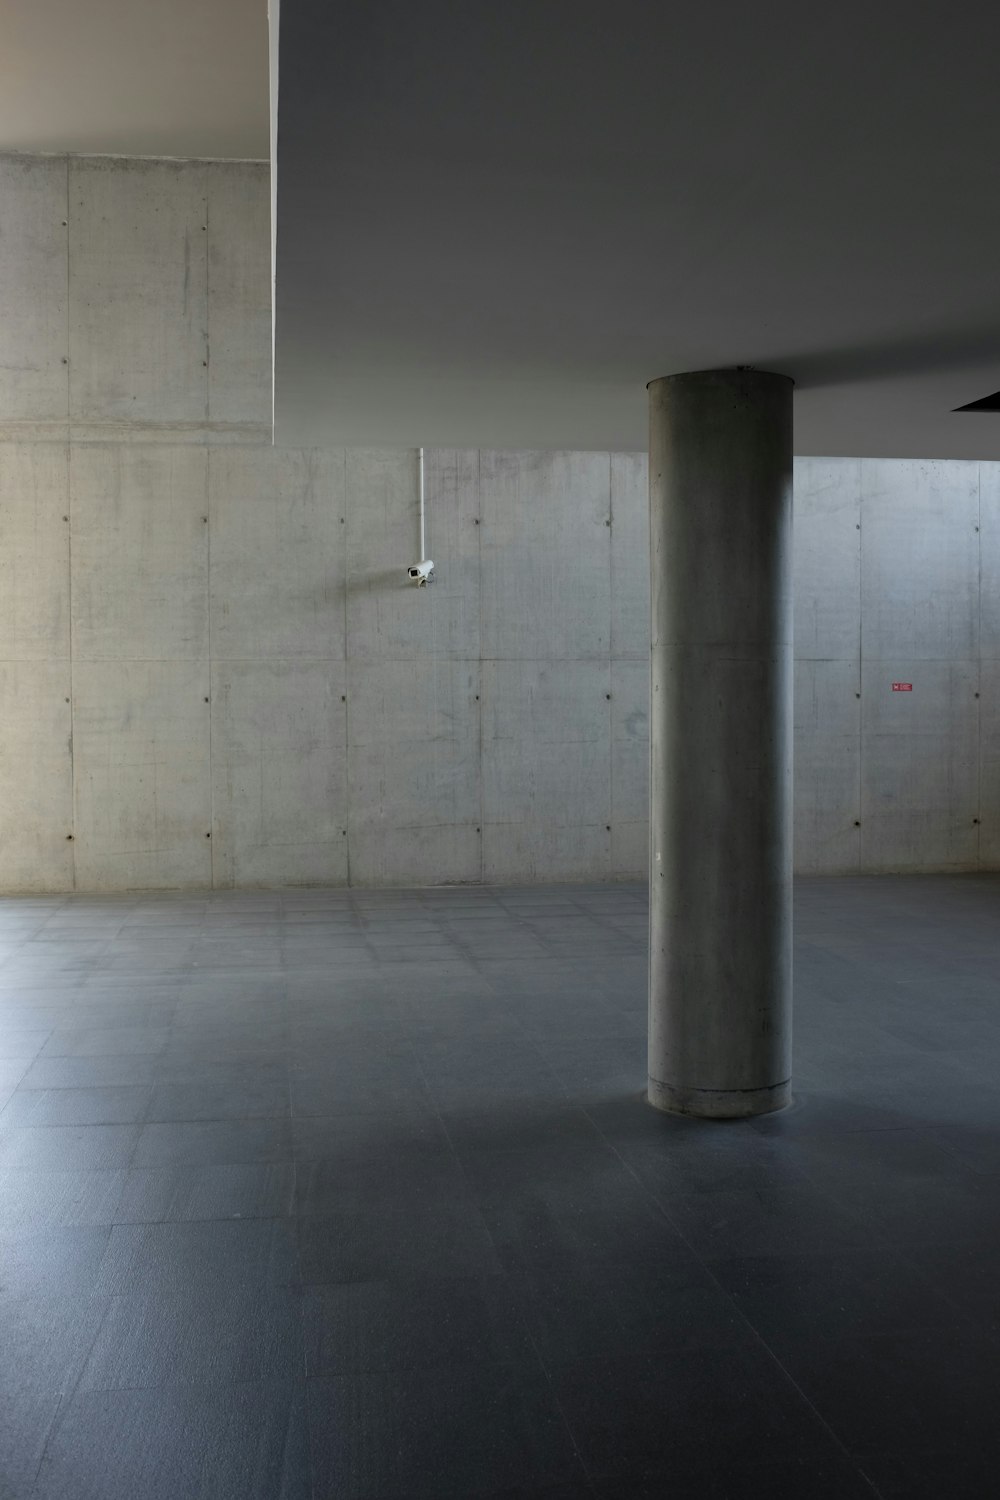 The inside of a building made of concrete walls with a platform supported by pillars.